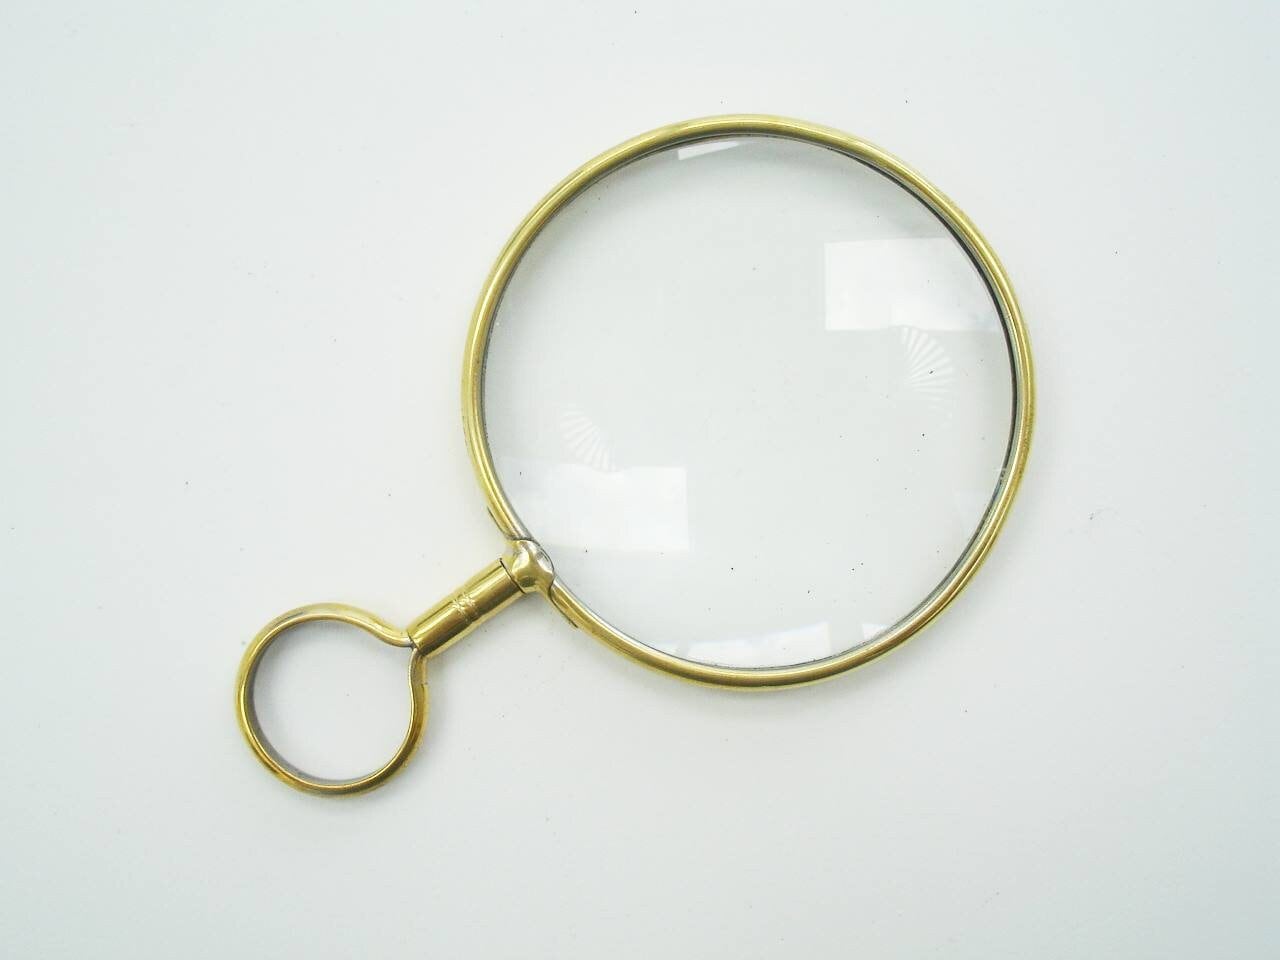 Vision Clear Magnifying Glass With LED Light Magnifier for Cross Stitch,  Jewelry, Embroidery, Knitting Sewing, Diamond Painting - Handmade 